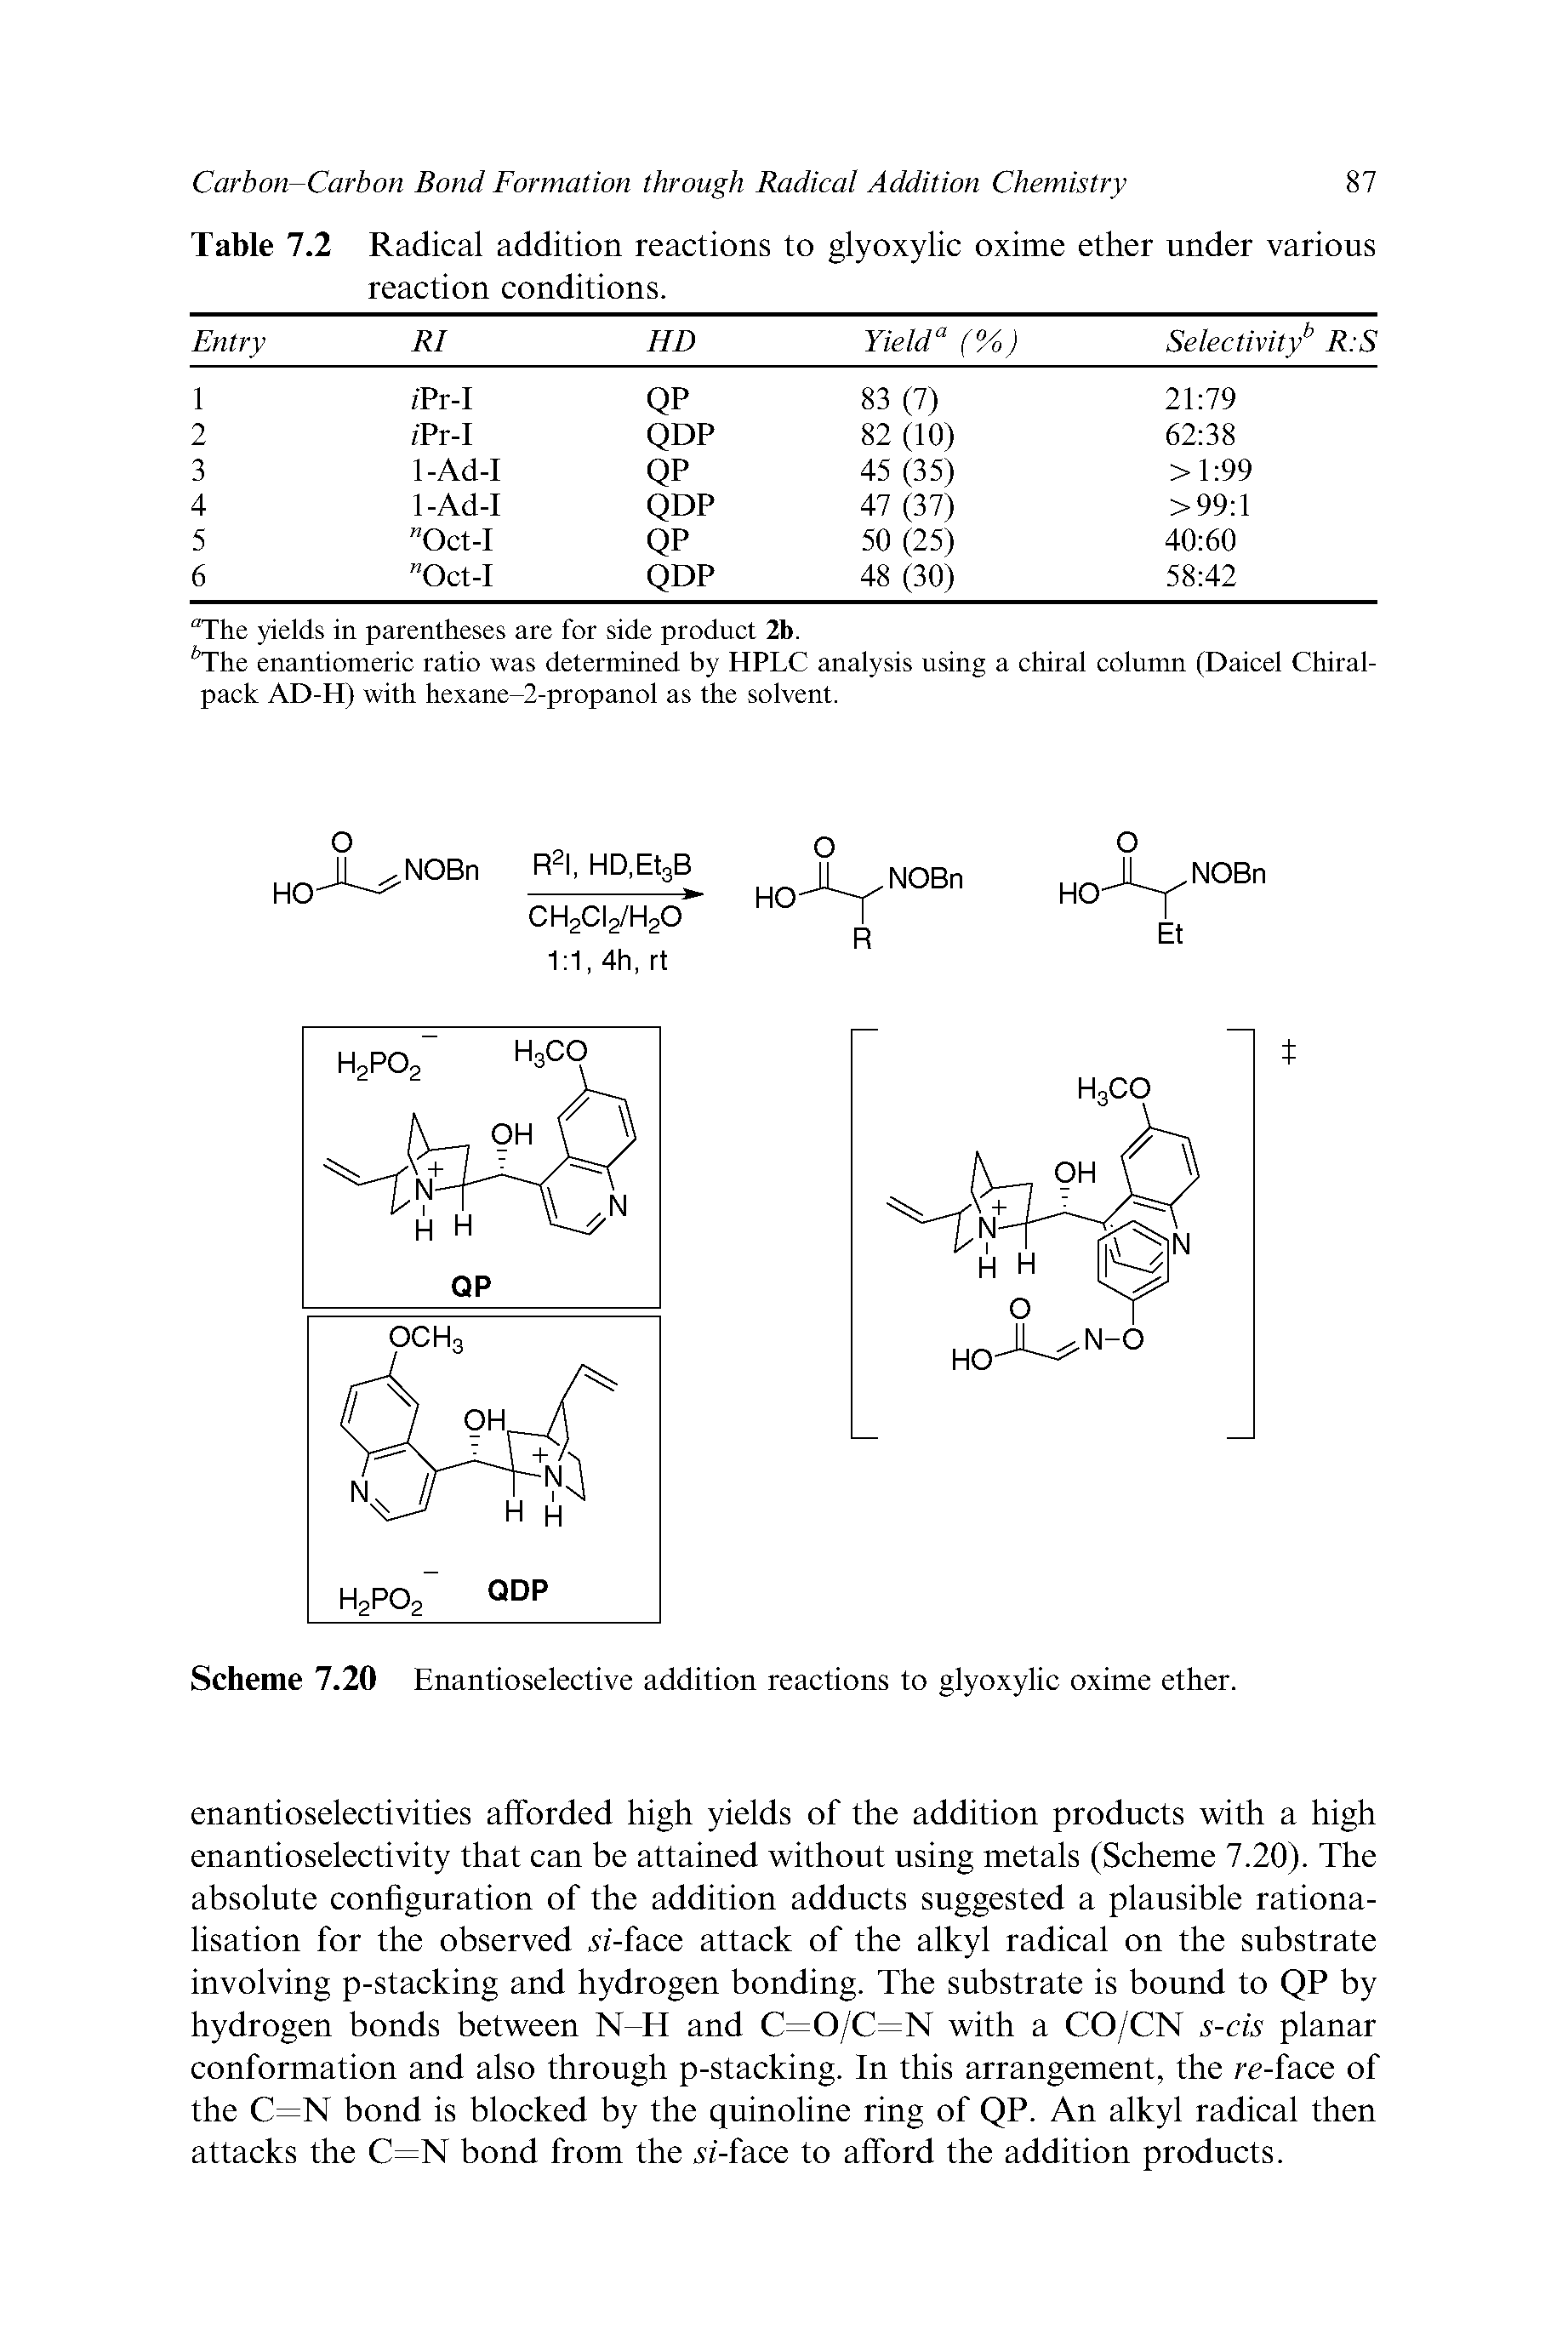 Table 7.2 Radical addition reactions to glyoxylic oxime ether under various reaction conditions.